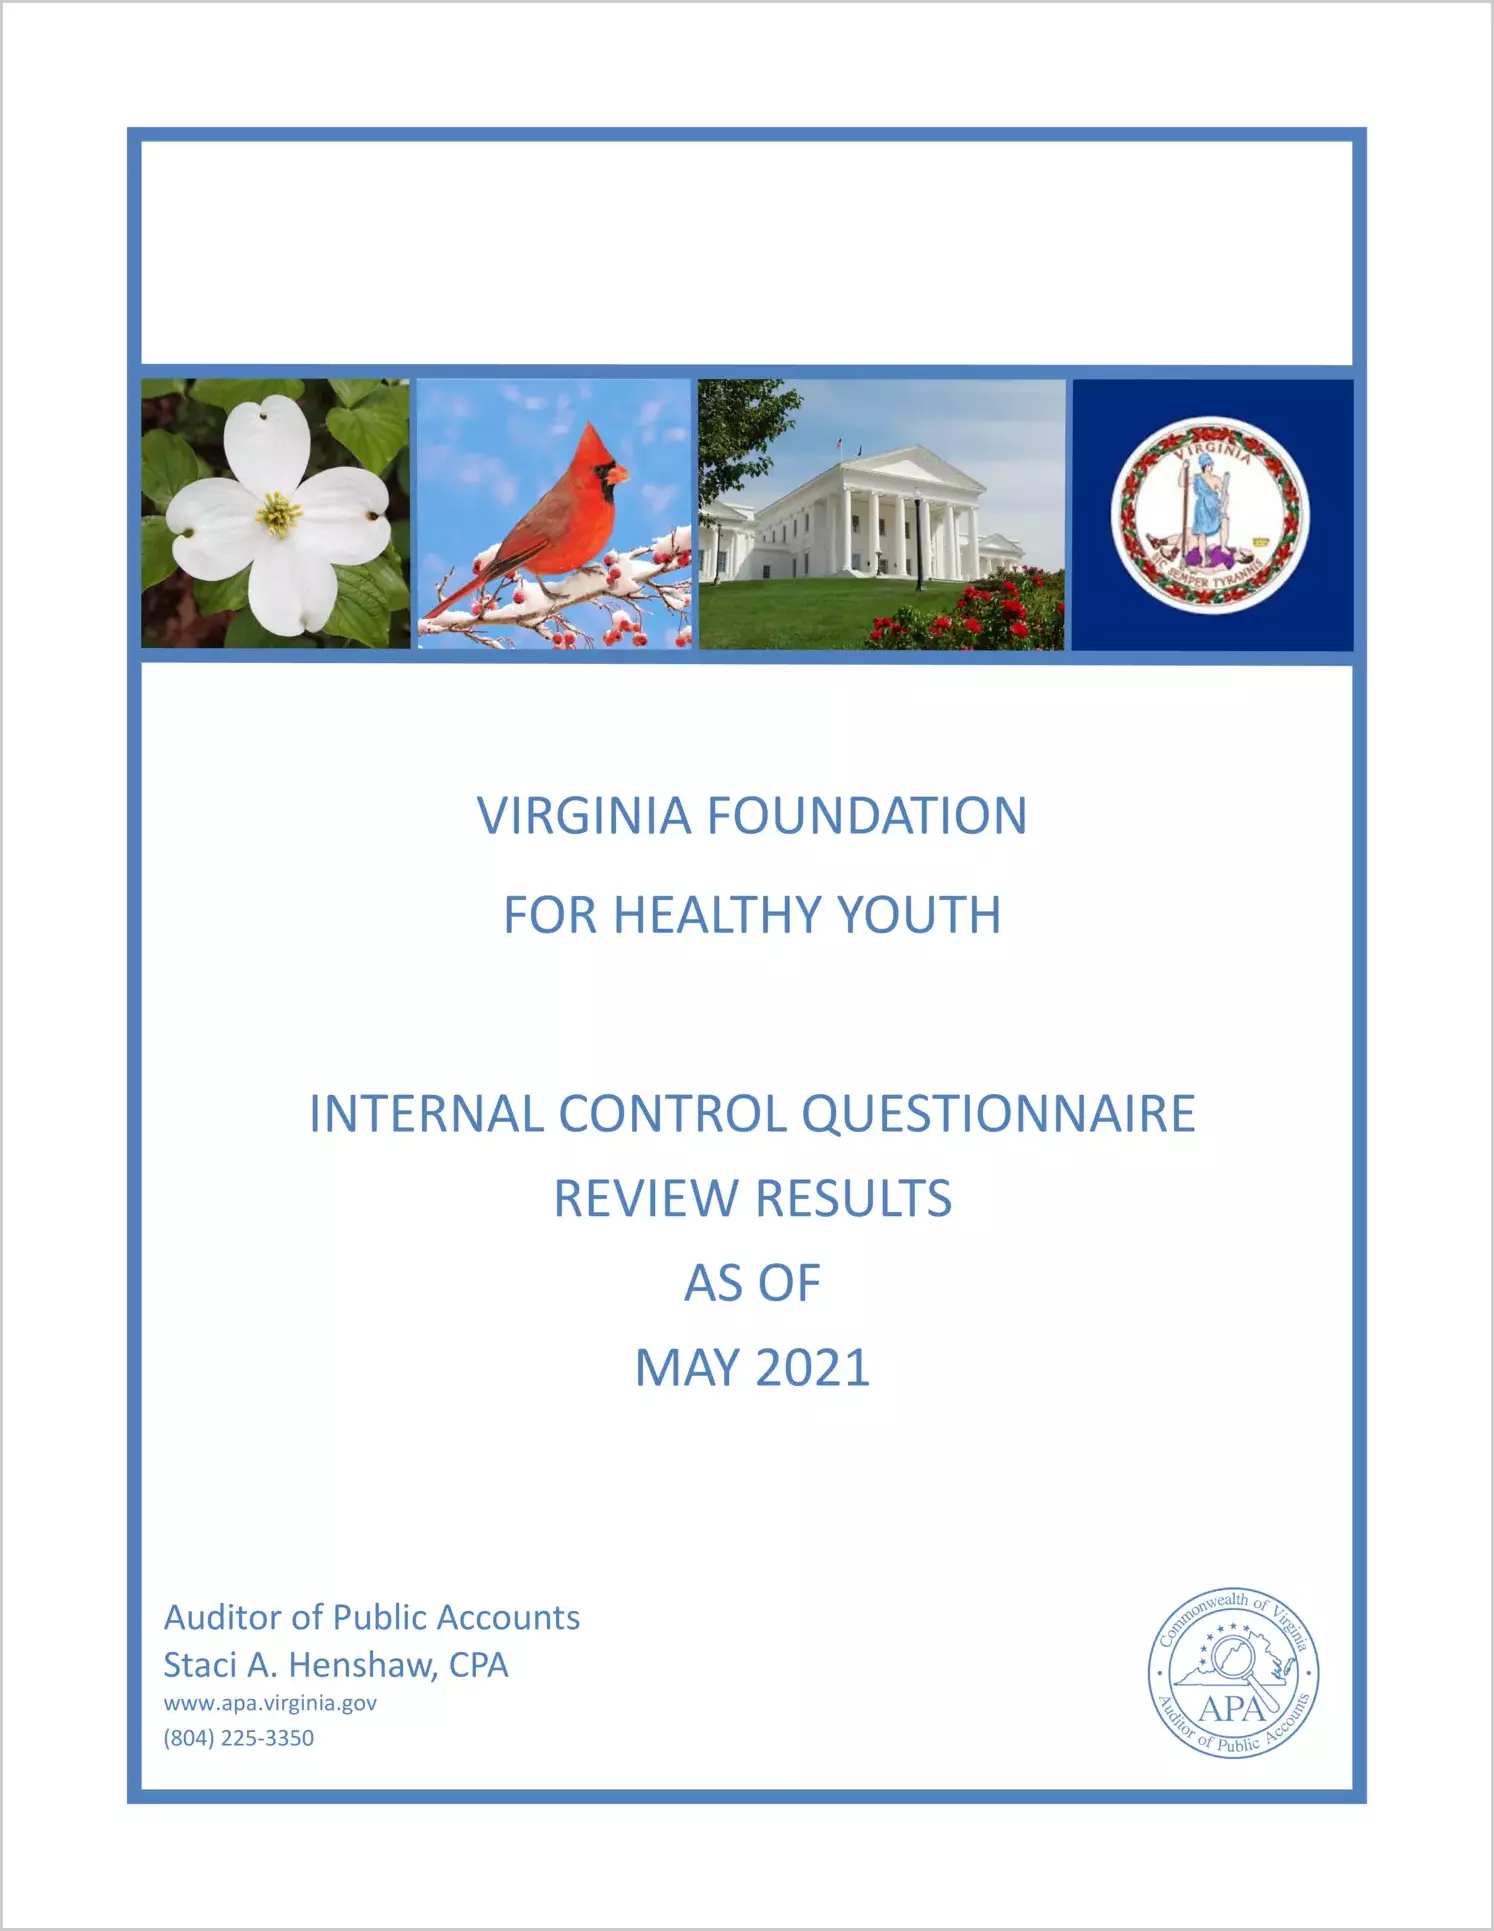 Virginia Foundation for Healthy Youth Internal Control Questionnaire Review Results as of May 2021